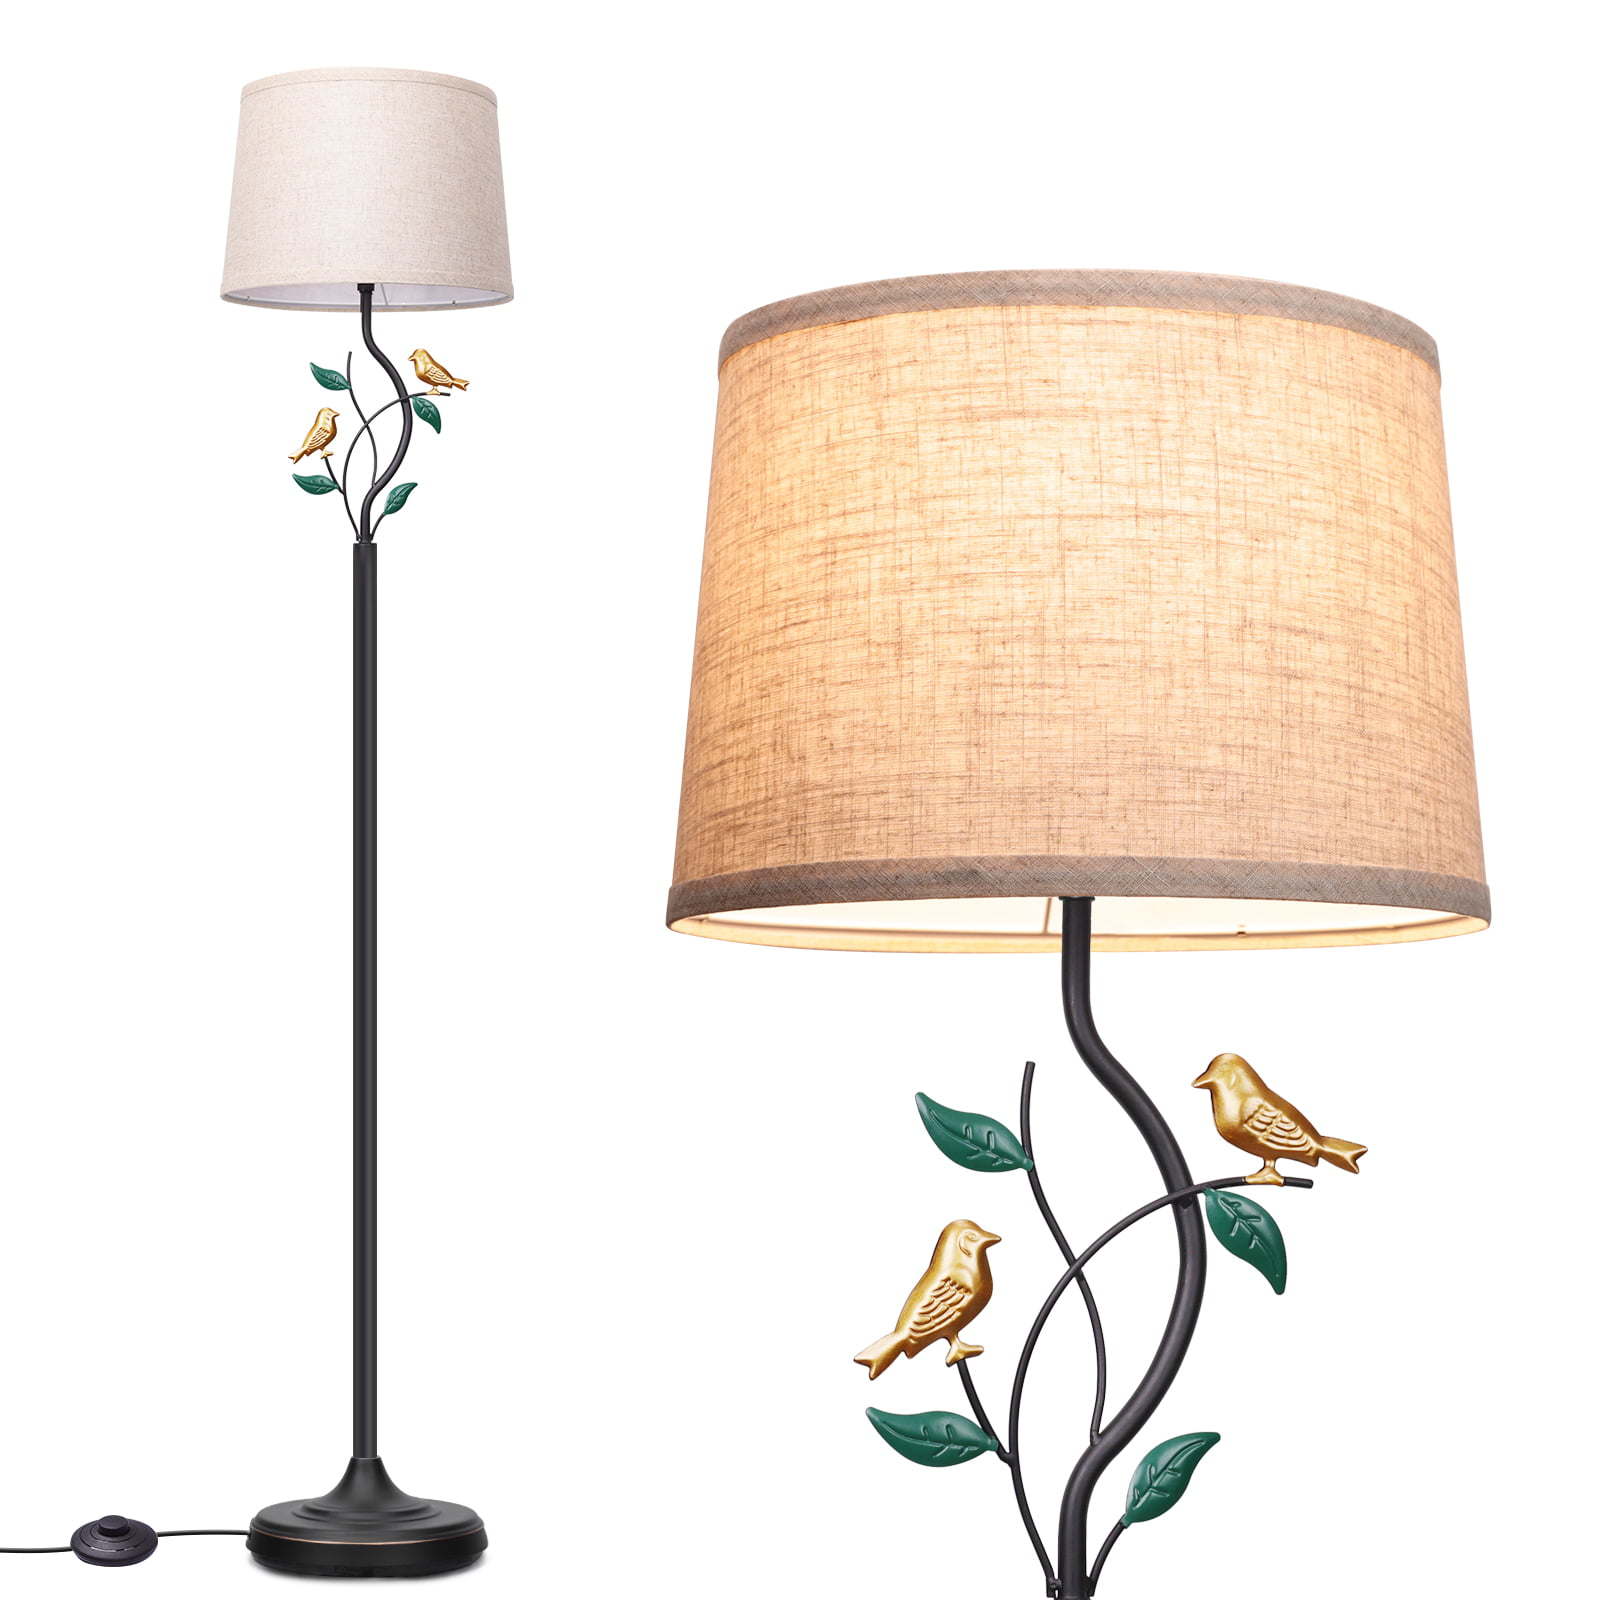 Dimmable Floor Lamp with Shade;  Modern Farmhouse Floor Lamp;  Rustic Floor Standing Lamp with Leaves & Birds Design;  Floor Stand up Lamp for Living Room;  Bedroom;  Office;  Dorm